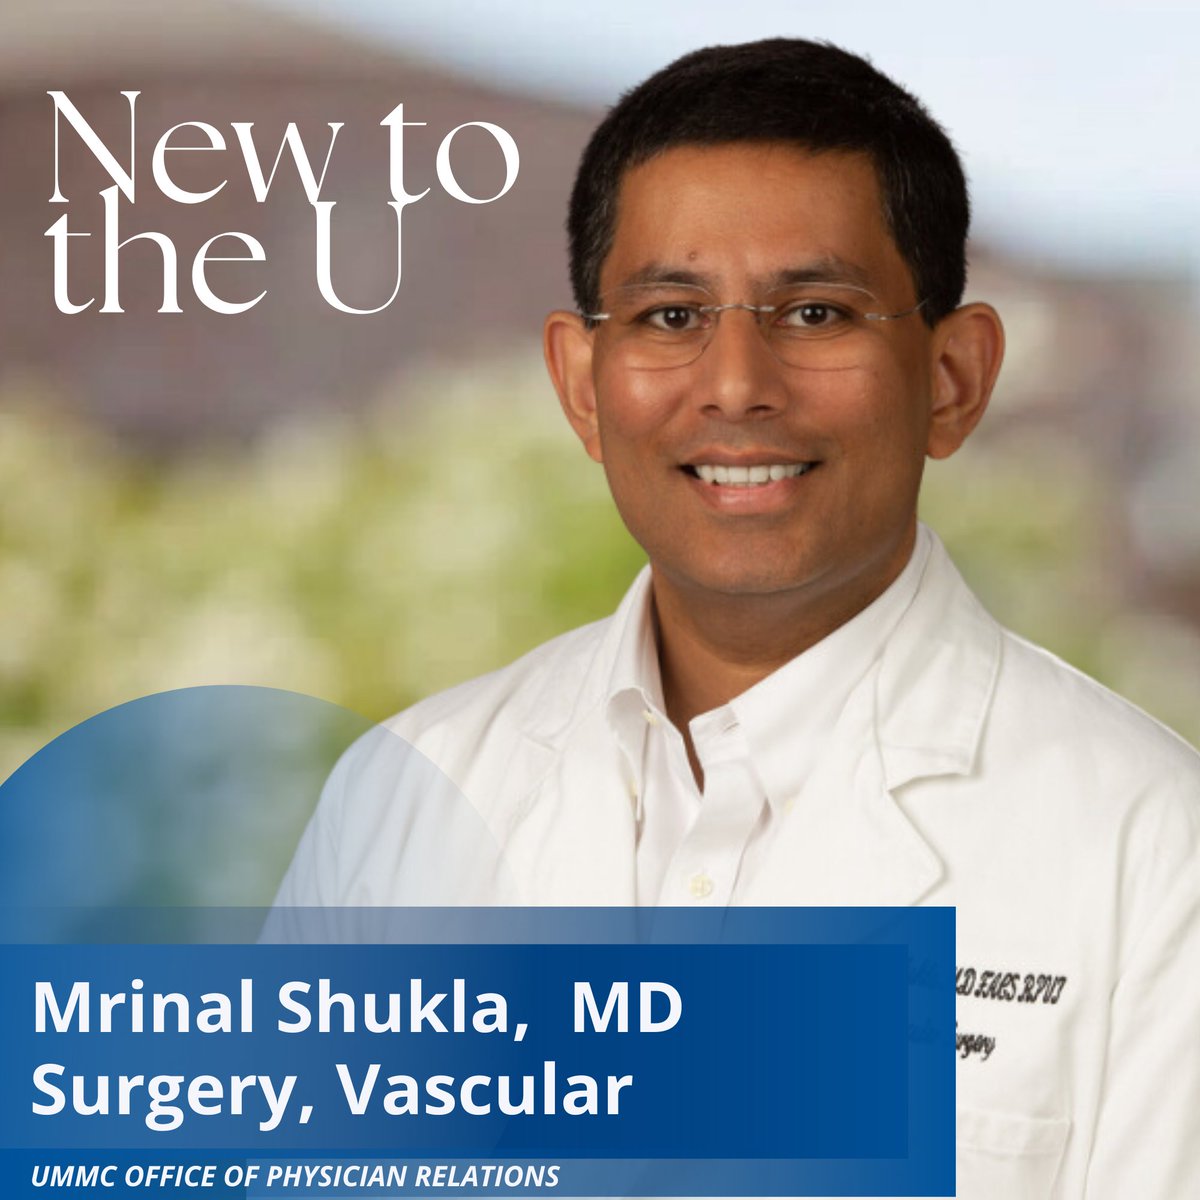 ＮＥＷ ＴＯ ＴＨＥ Ｕ🥼
👉Dr. Mrinal Shukla - Vascular Surgery👈
The Office of Physician Relations welcomes Dr. Mrinal Shukla to the Department of Surgery! Dr. Shukla specializes and is board certified in vascular surgery.
Welcome to UMMC, Dr. Shukla!
#newtotheU #welcometotheU